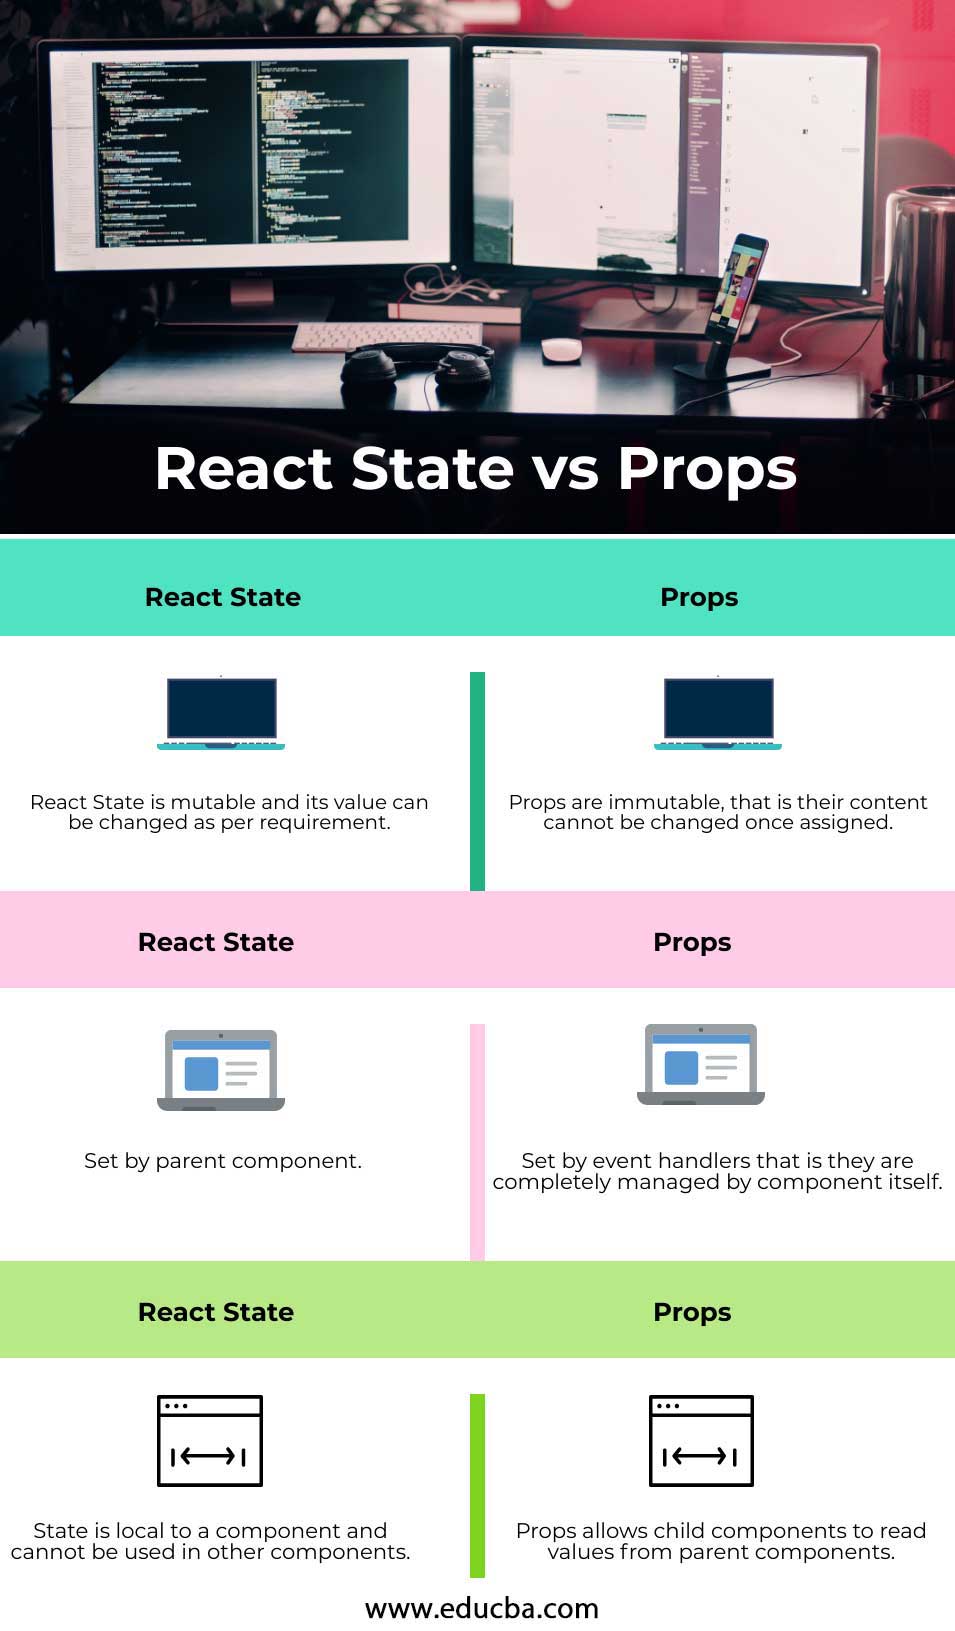 react state vs props info